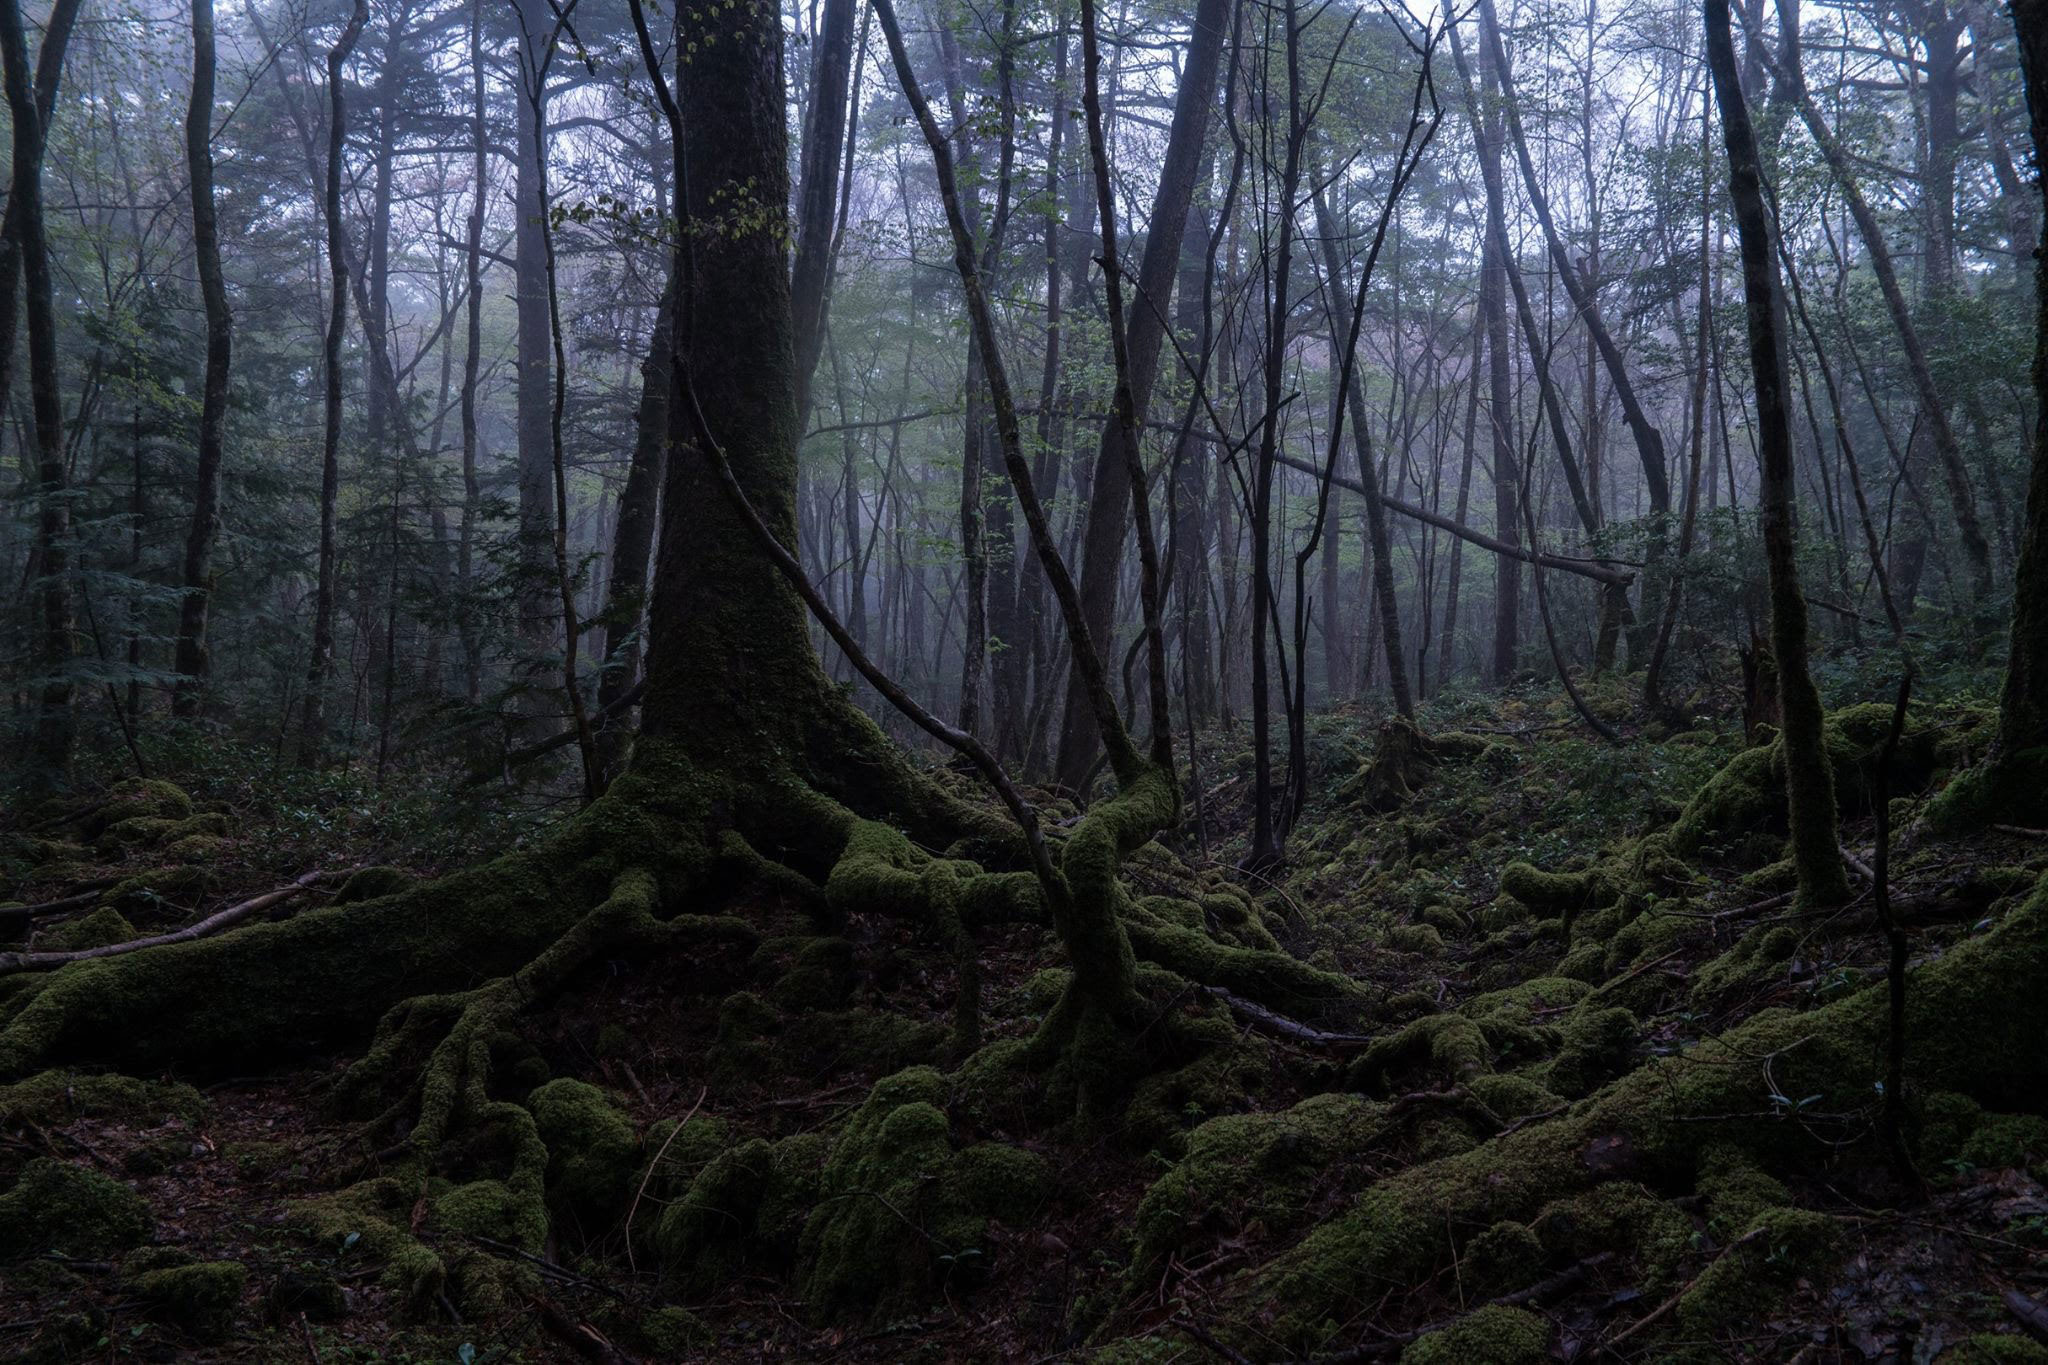  Suicide Forest (Aokigahara Forest), Japan